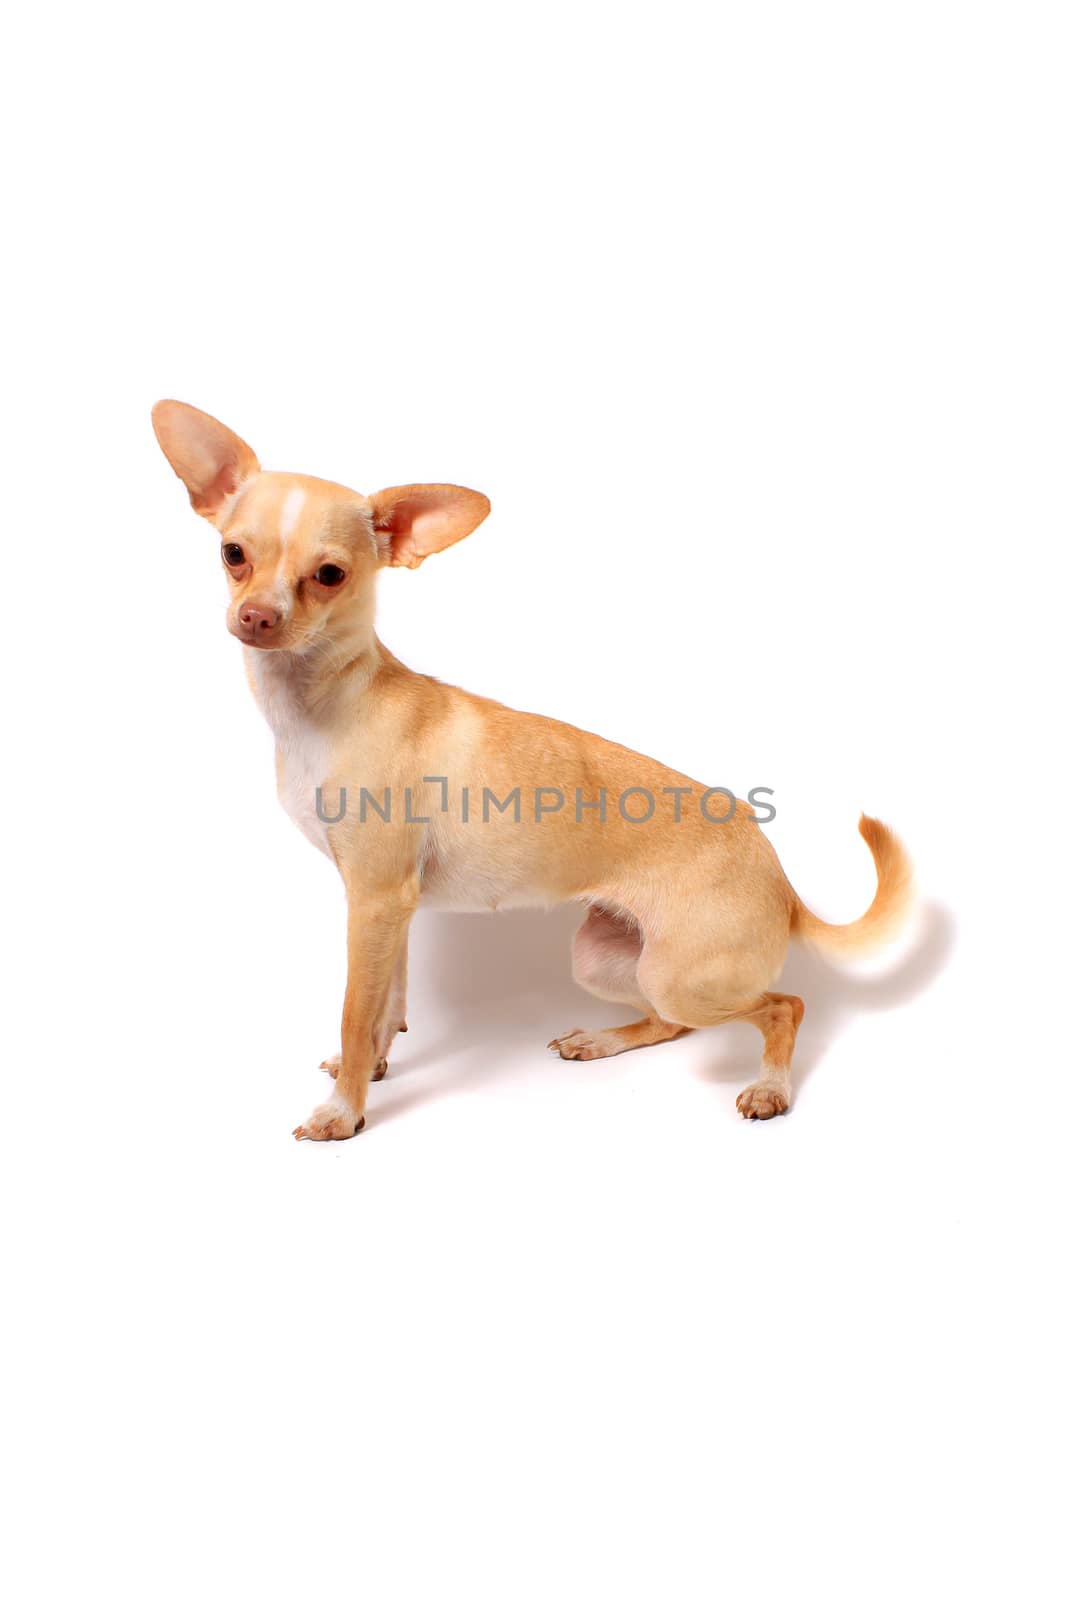 Cute little chihuahua dog sitting portrait on a white background